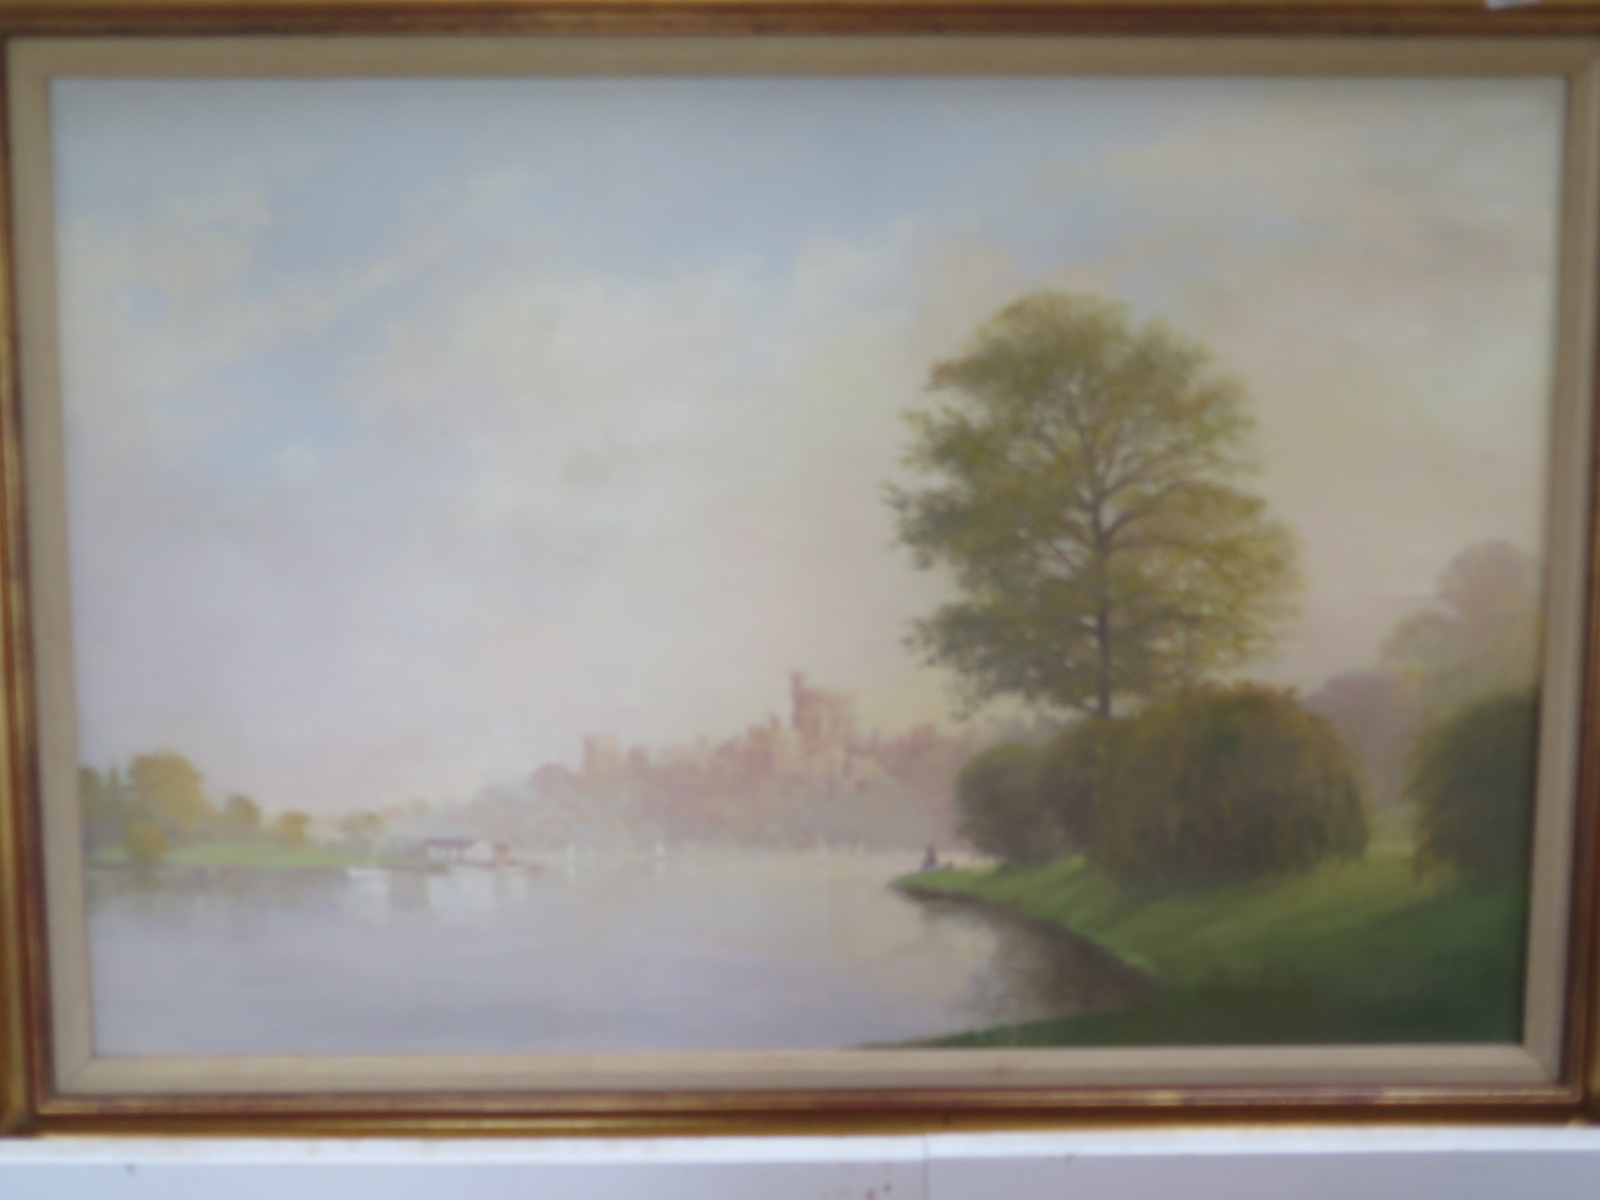 "Windsor Castle" by John Miller - Cornish artist, oil on canvas 58x90cm - generally good condition